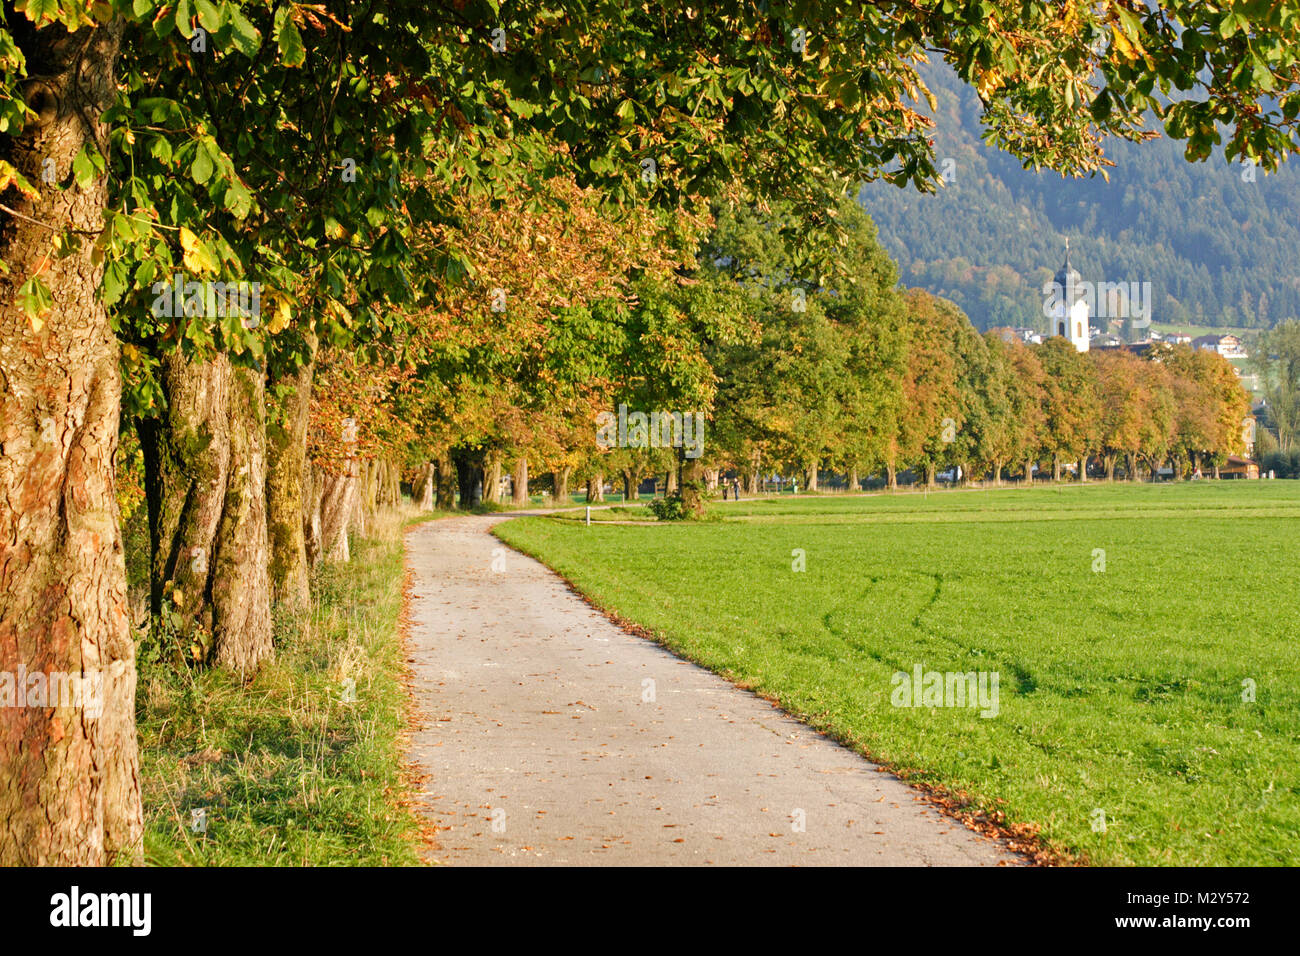 Alley with chestnut trees Stock Photo